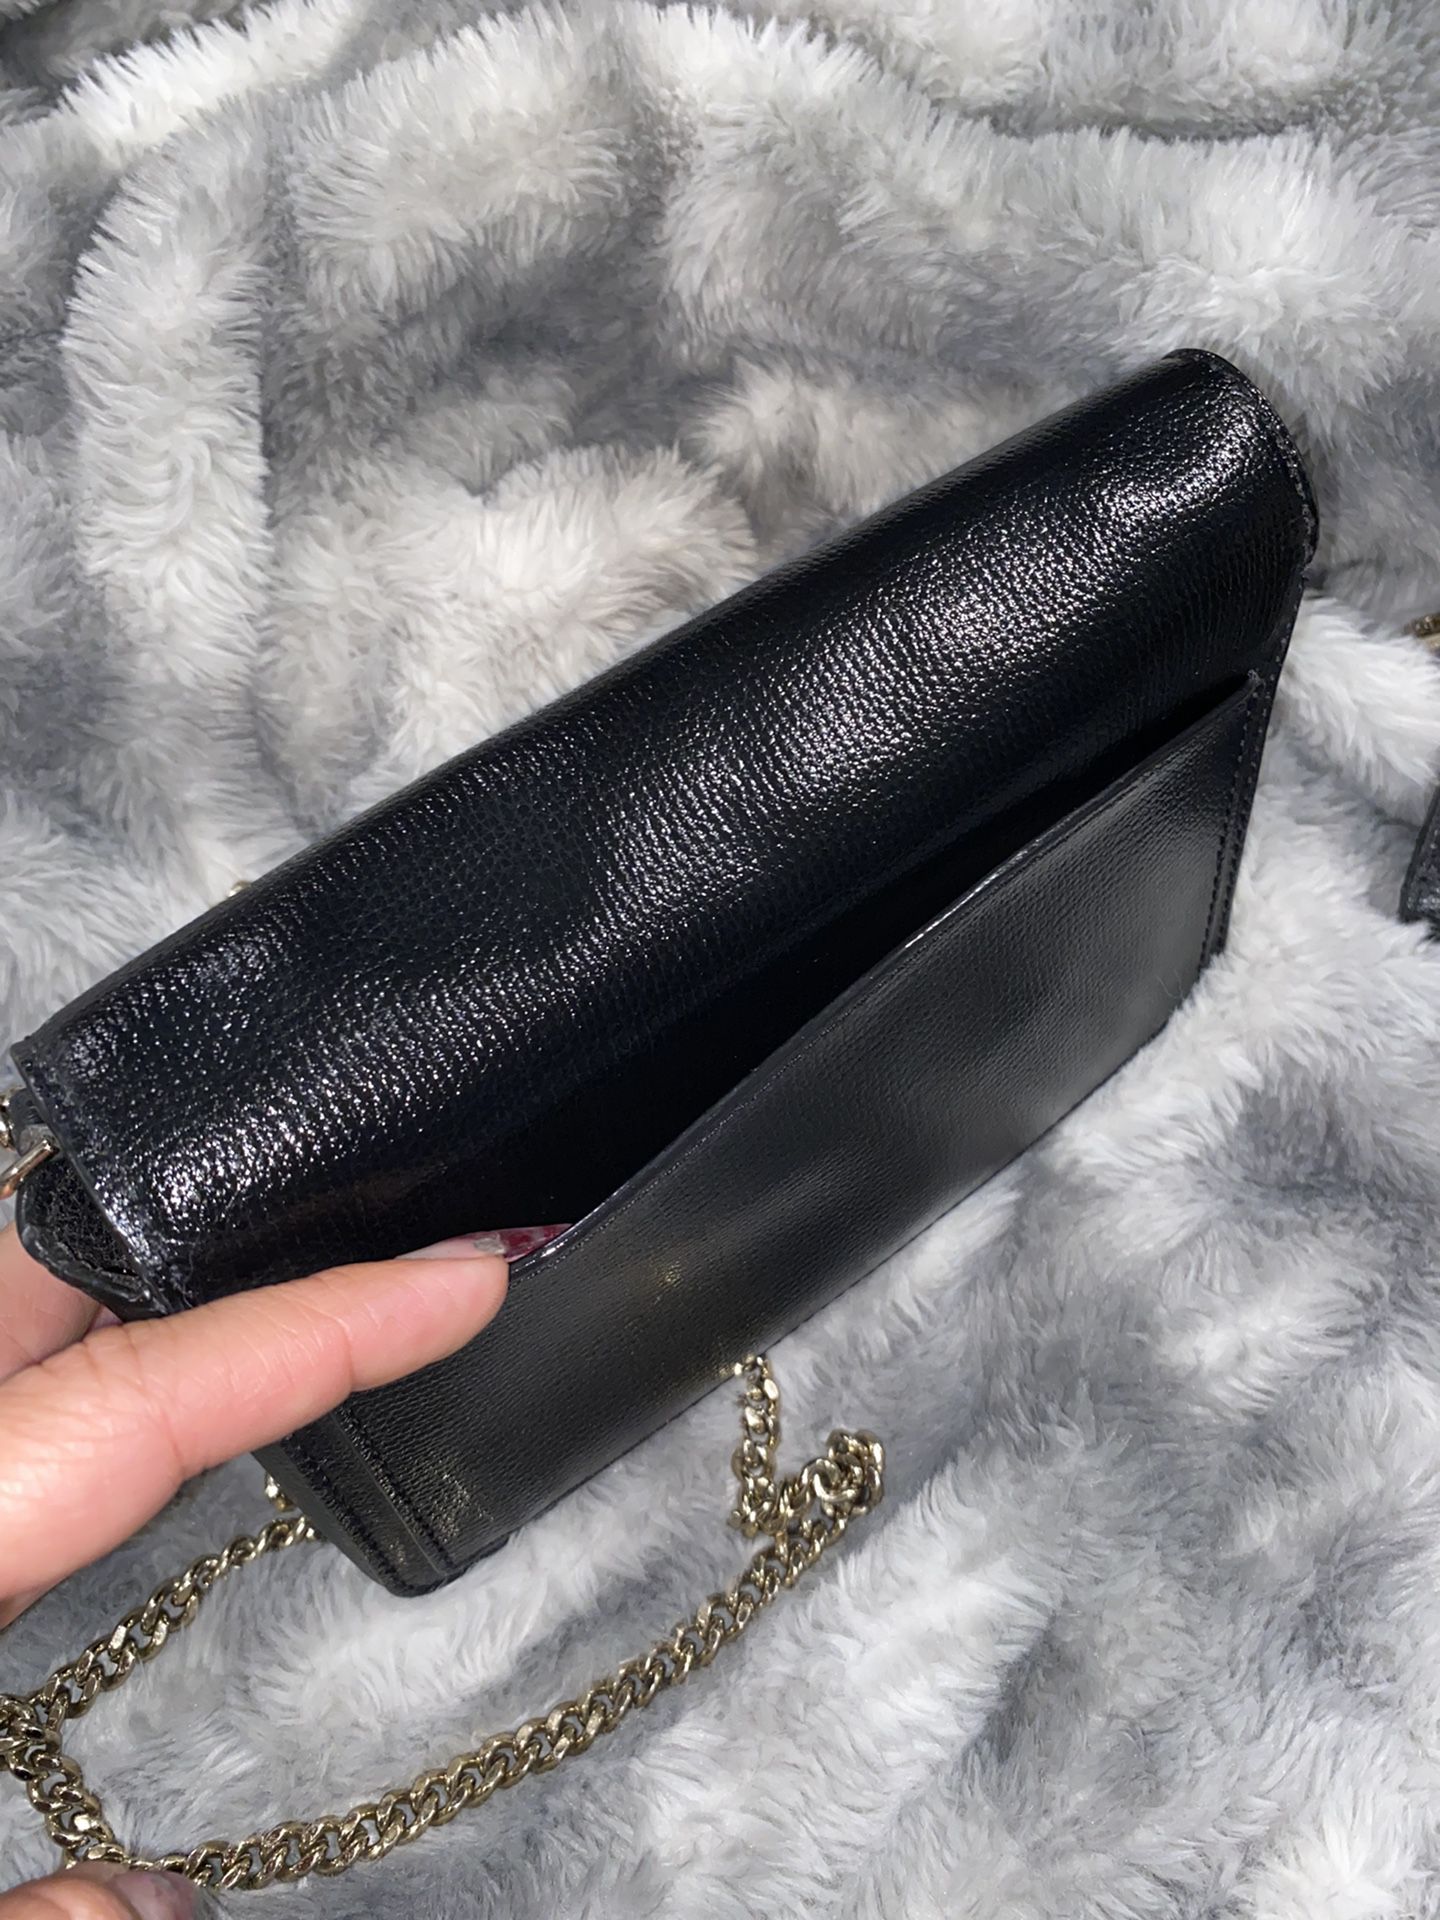 Black Kate Spade Purse And Wallet for Sale in Albuquerque, NM - OfferUp